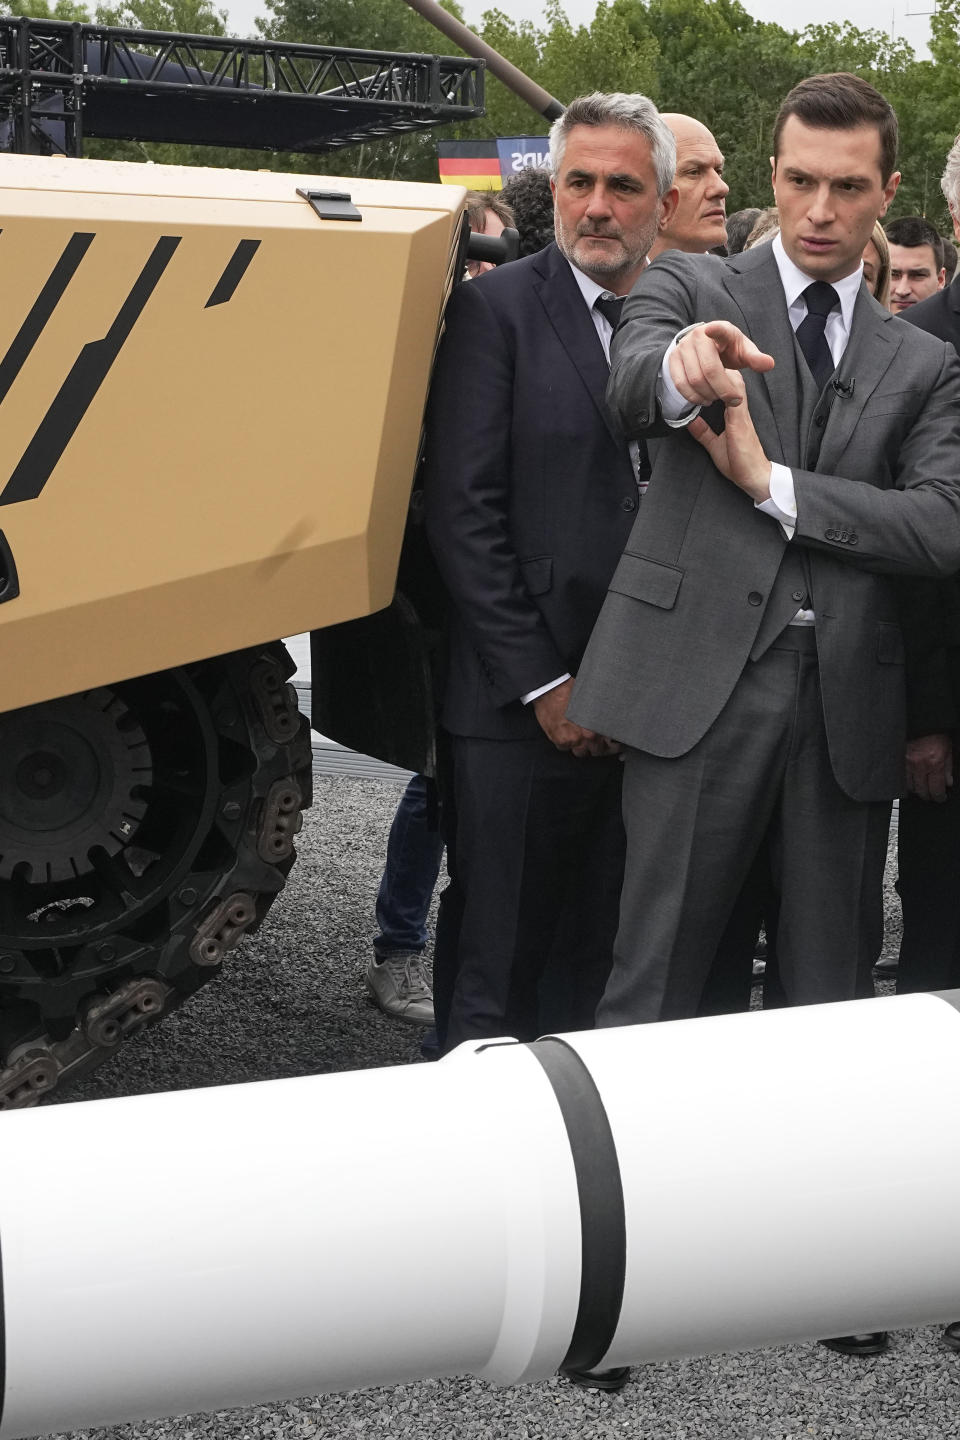 Jordan Bardella, president of the far-right National Front party, points to an Ascalon 120mm gun at the Eurosatory Defense and Security exhibition, Wednesday, June 19, 2024 in Villepinte, north of Paris. Jordan Bardella, hoping to become France's prime minister, appealed Tuesday to voters to hand his party a clear majority after French President Emmanuel Macron's announcement on June 9 that he was dissolving France's National Assembly, parliament's lower house.( AP Photo/Michel Euler)